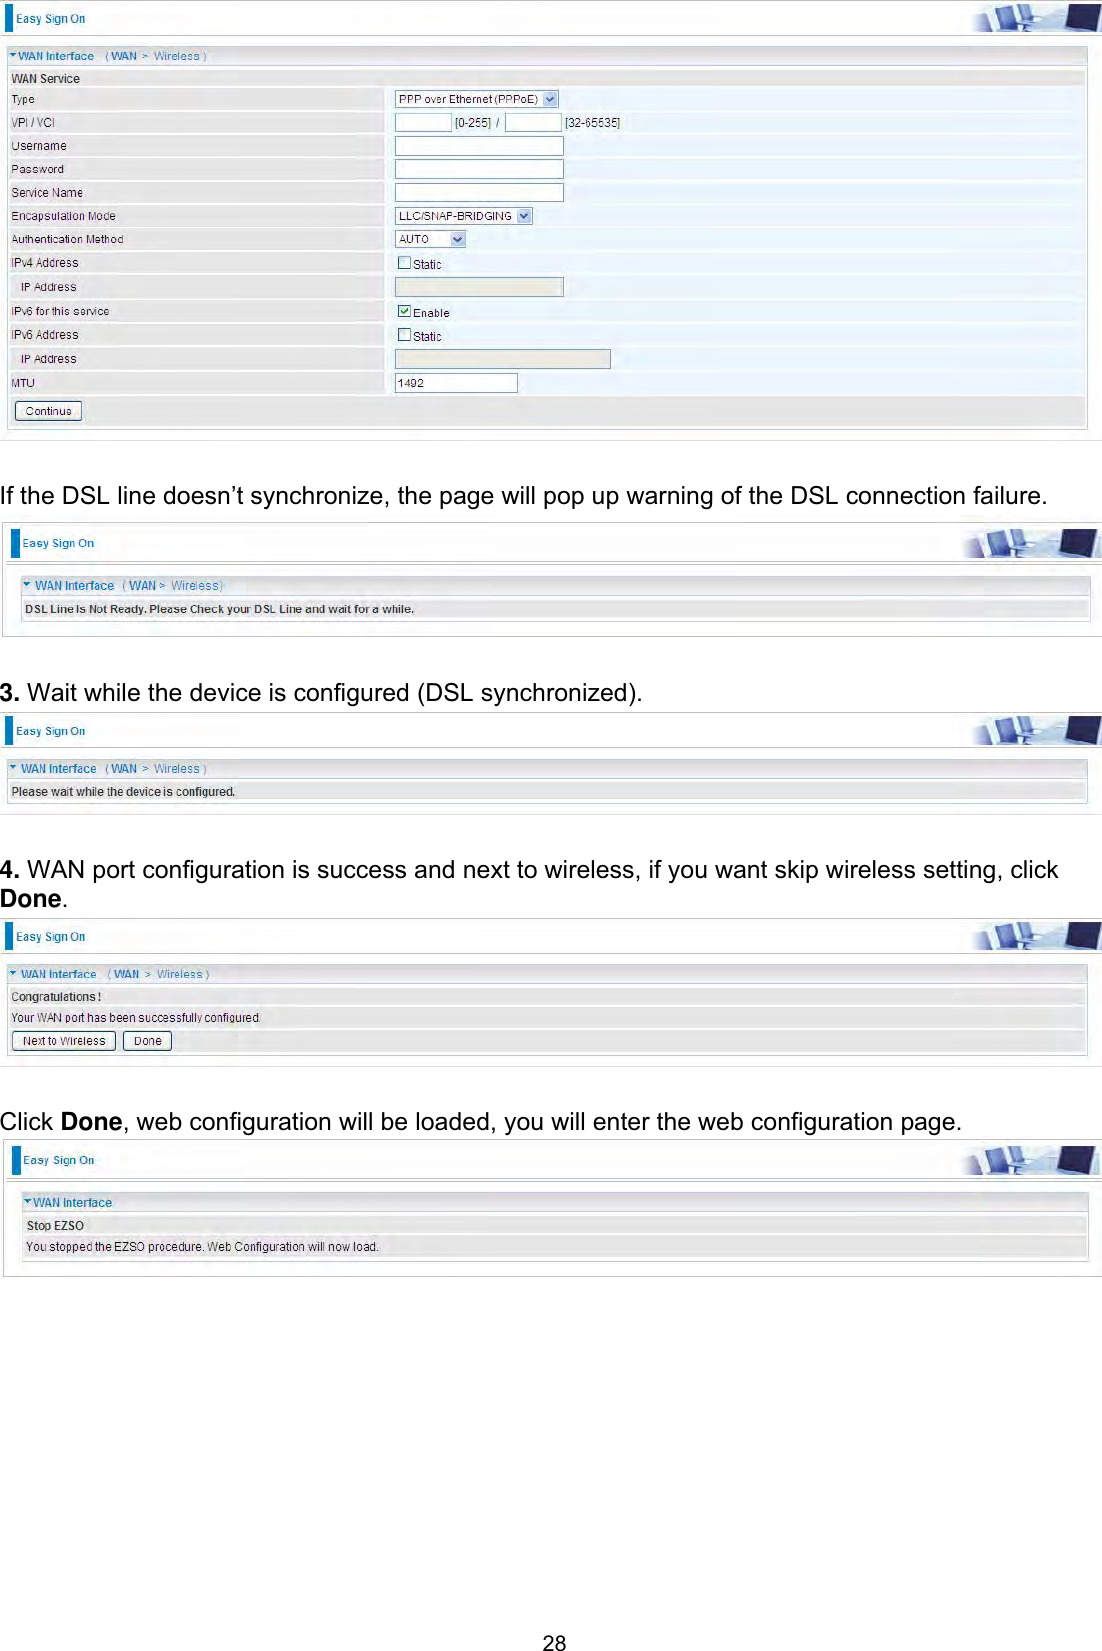 28If the DSL line doesn’t synchronize, the page will pop up warning of the DSL connection failure. 3. Wait while the device is configured (DSL synchronized).4. WAN port configuration is success and next to wireless, if you want skip wireless setting, click Done.Click Done, web configuration will be loaded, you will enter the web configuration page.